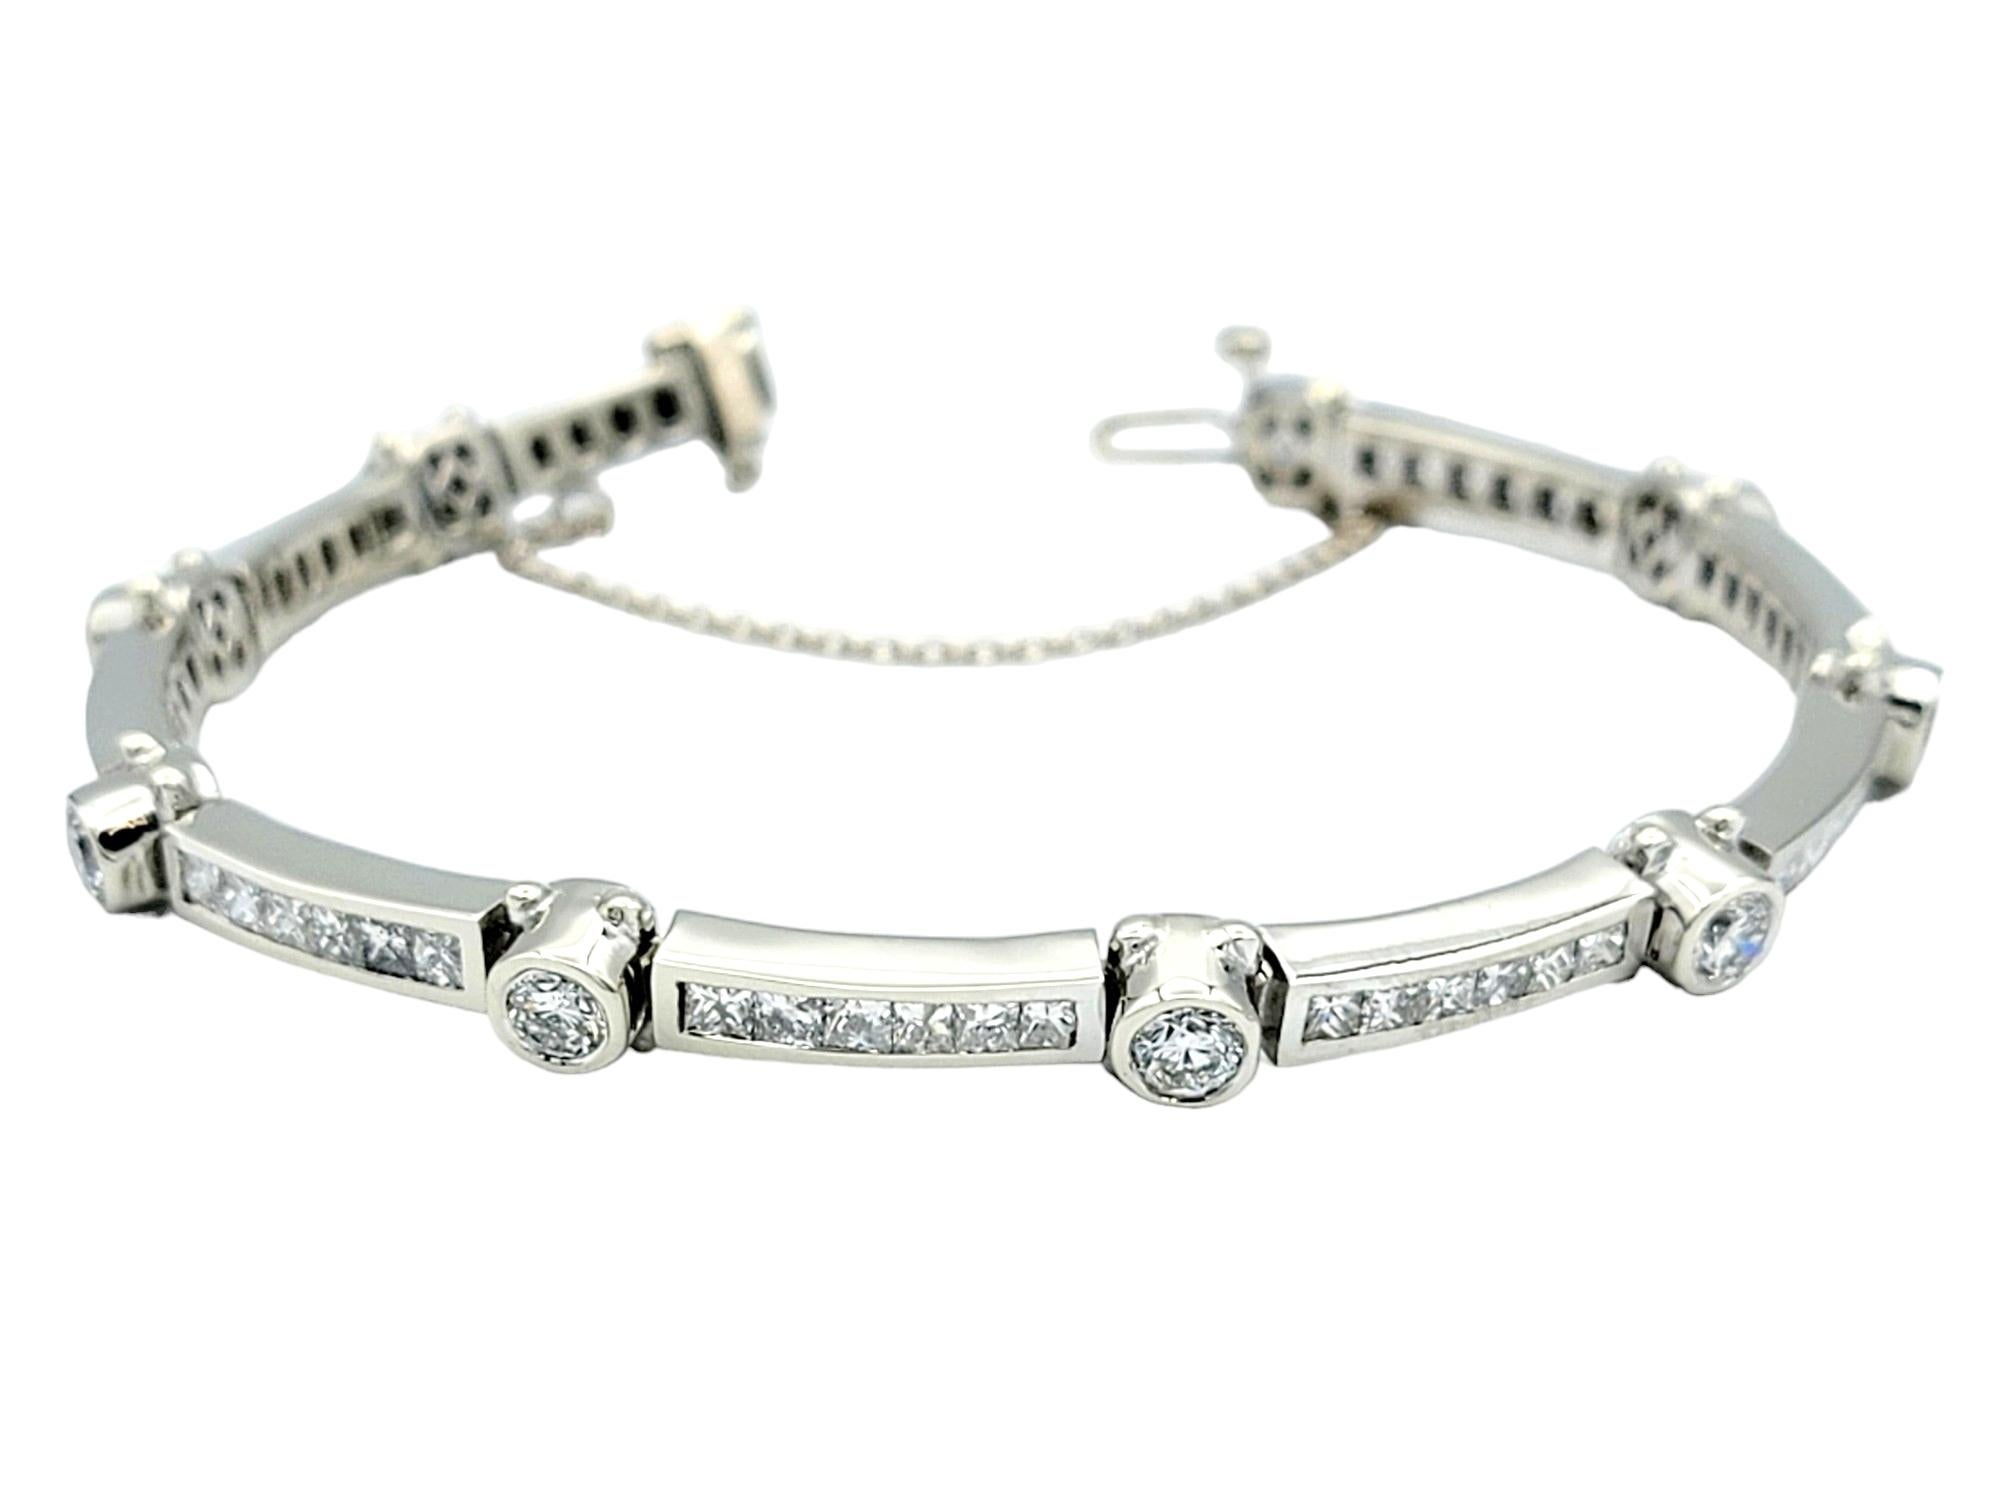 The inner circumference of this bracelet measures 6.75 inches and will comfortably fit a 6 - 6.5 inch wrist. 

This gorgeous link bracelet, set in elegant 14 karat white gold, is a captivating and luxurious piece with a unique design. The